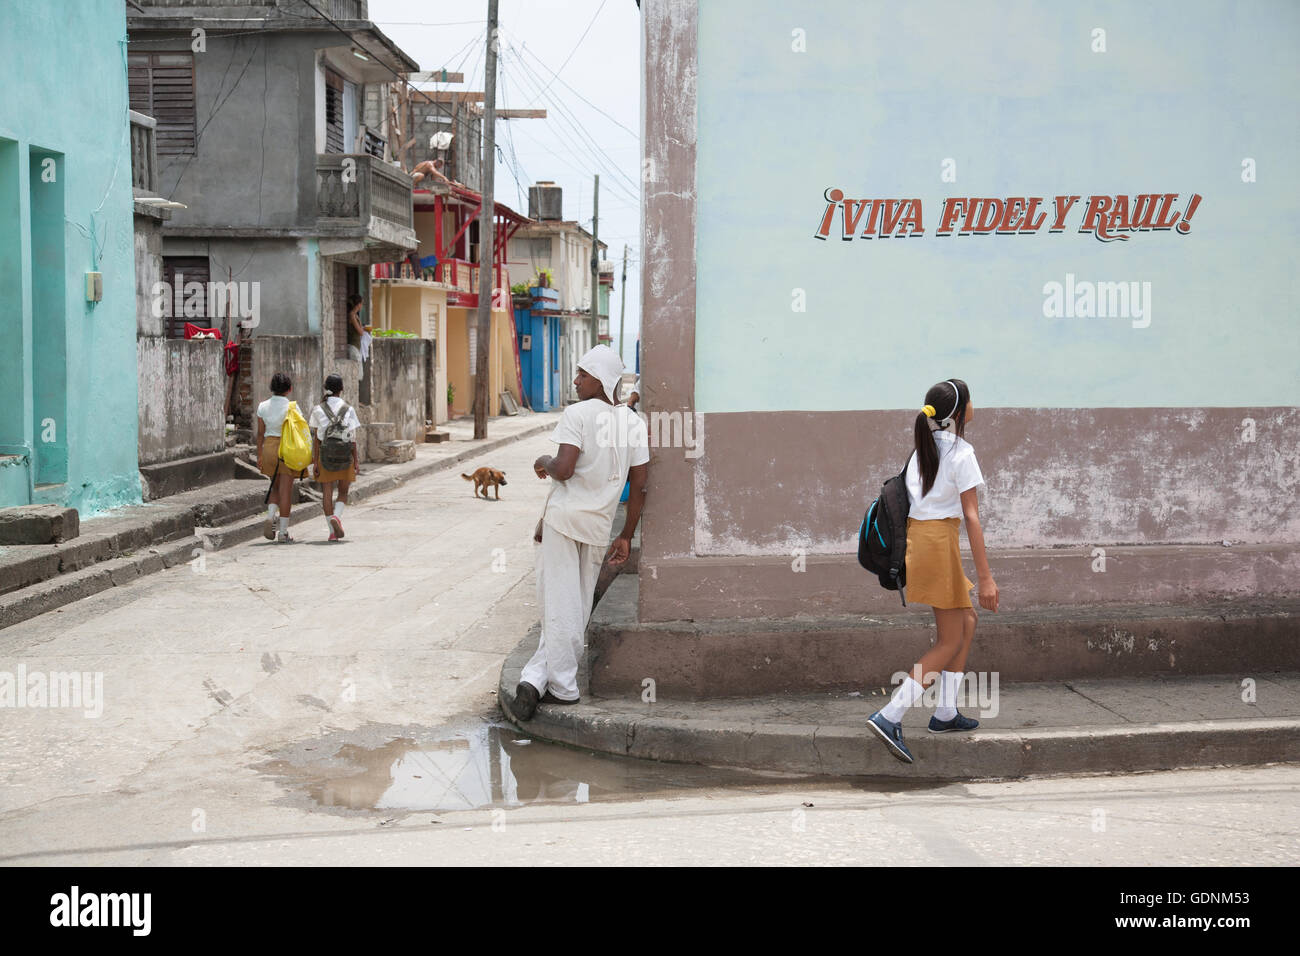 Street scene with a pro-Castro brothers slogan, school children, a baker and a dog, in Baracoa, Cuba Stock Photo